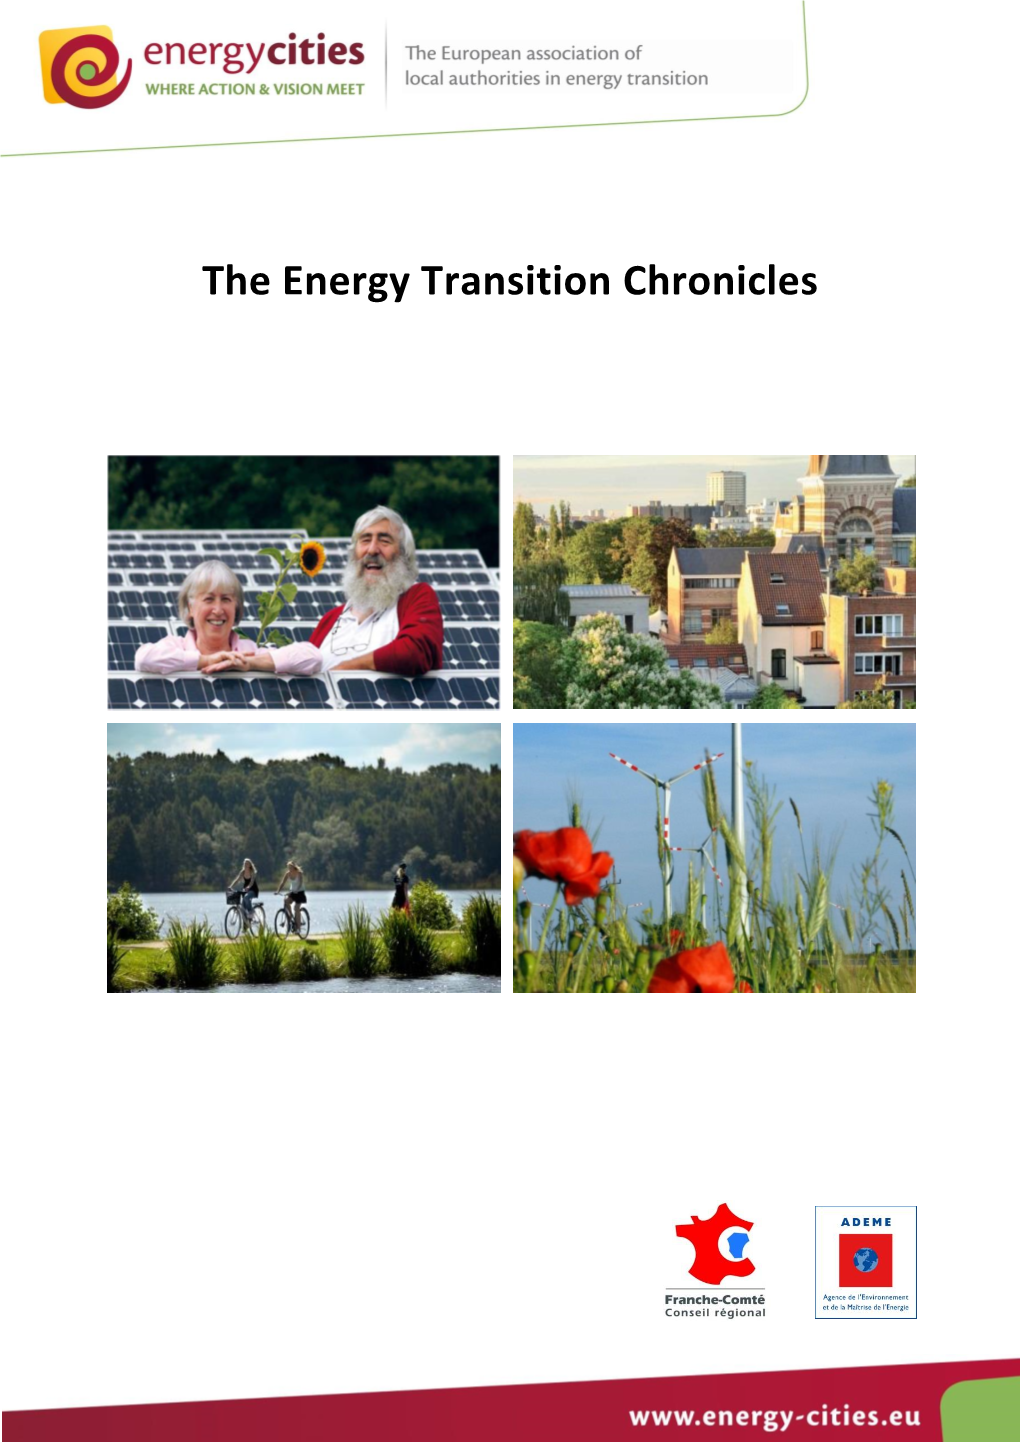 The Energy Transition Chronicles